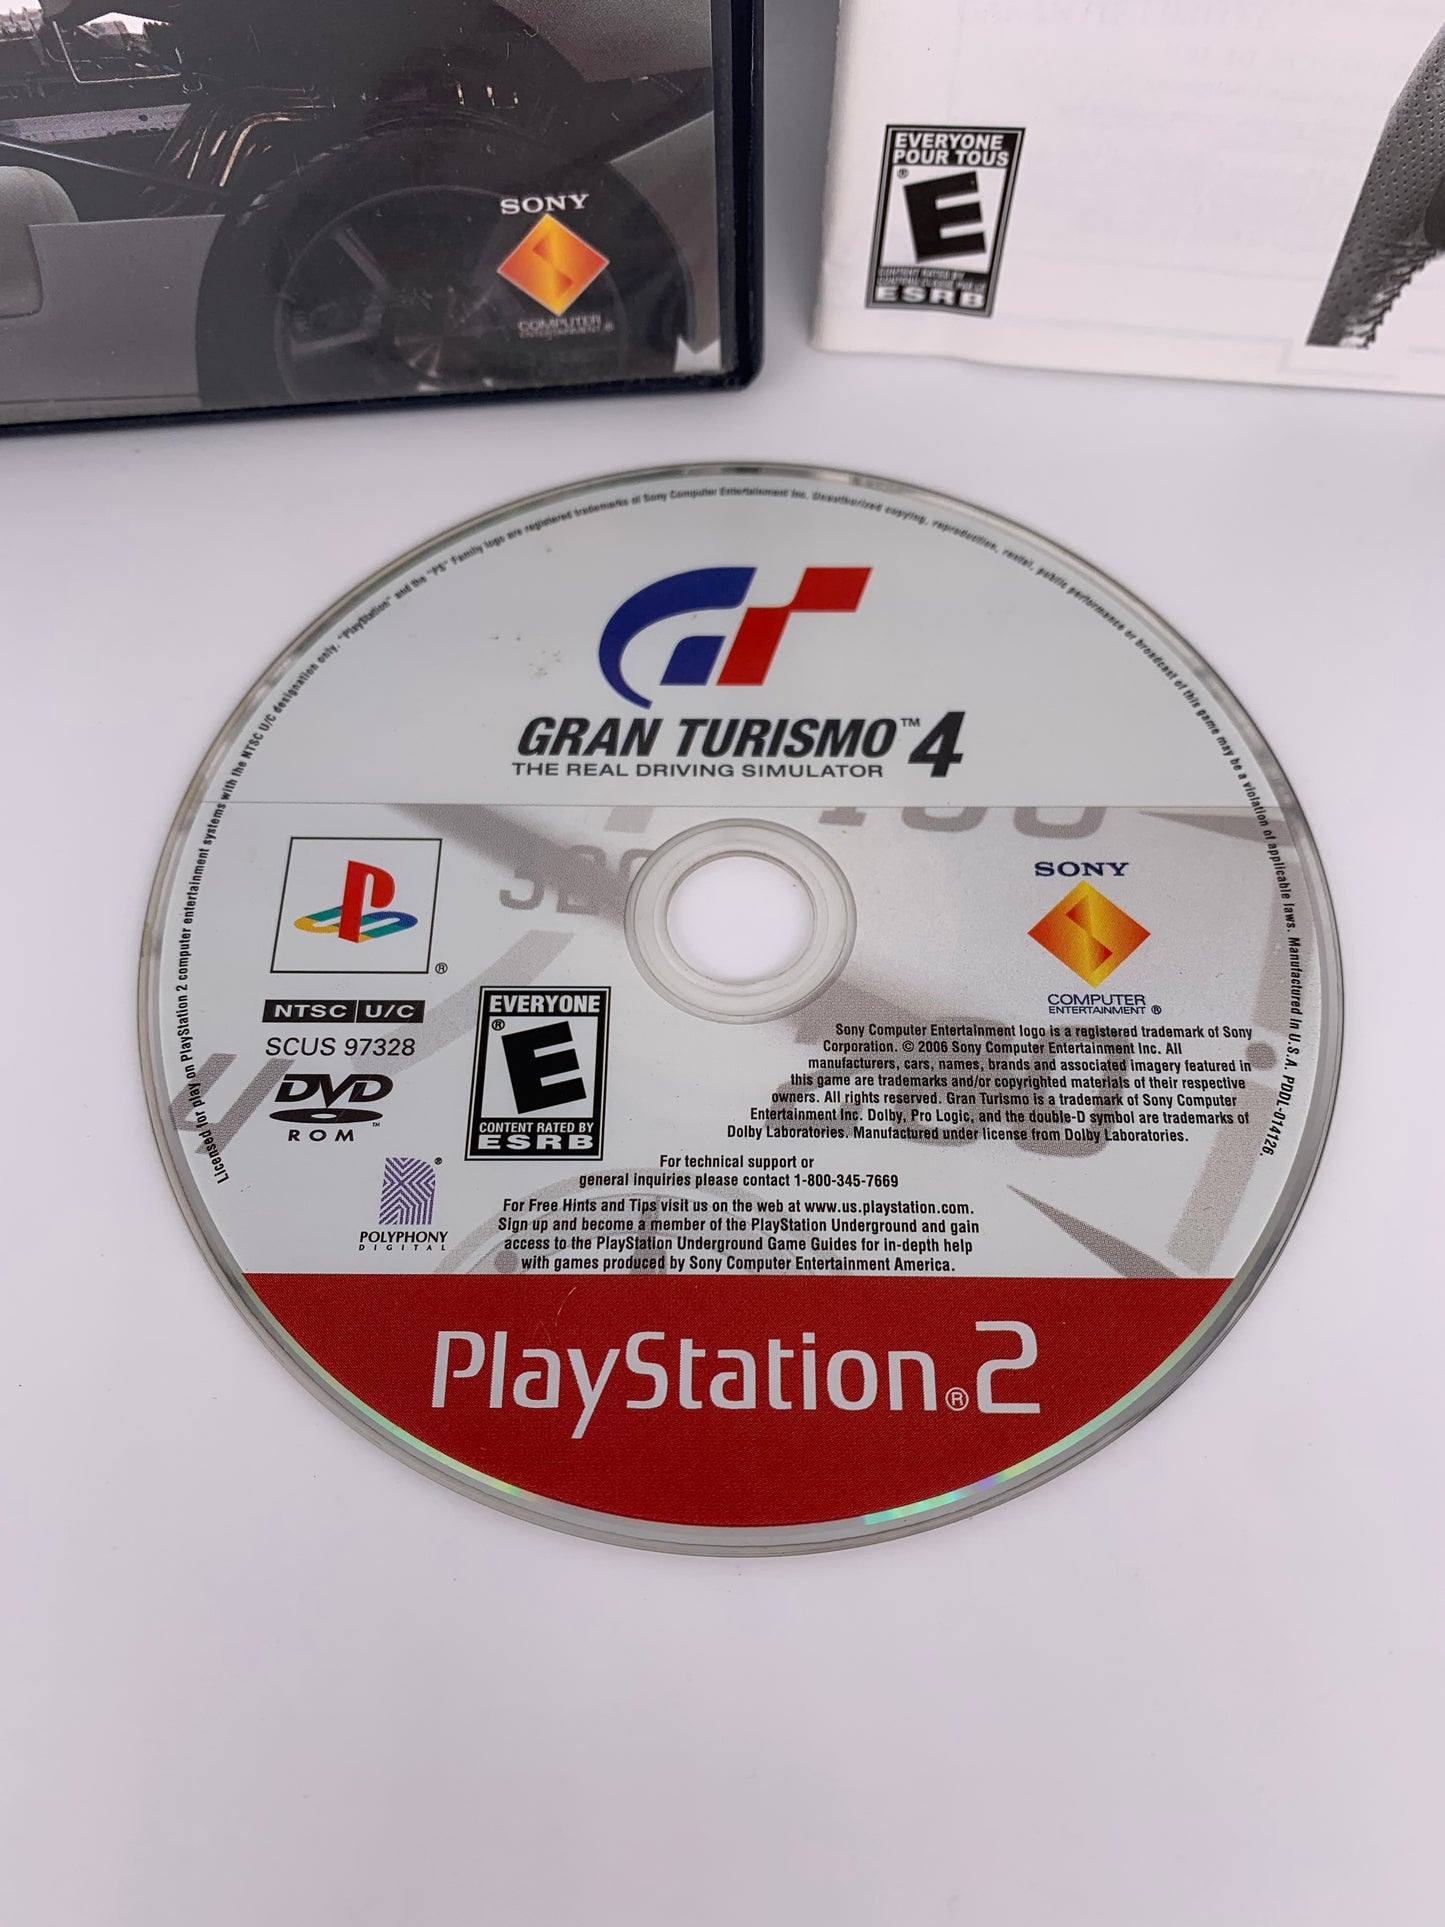 SONY PLAYSTATiON 2 [PS2] | GRAN TURiSMO 4  GT4 THE REAL DRiViNG SiMULATOR | GREATEST HiTS